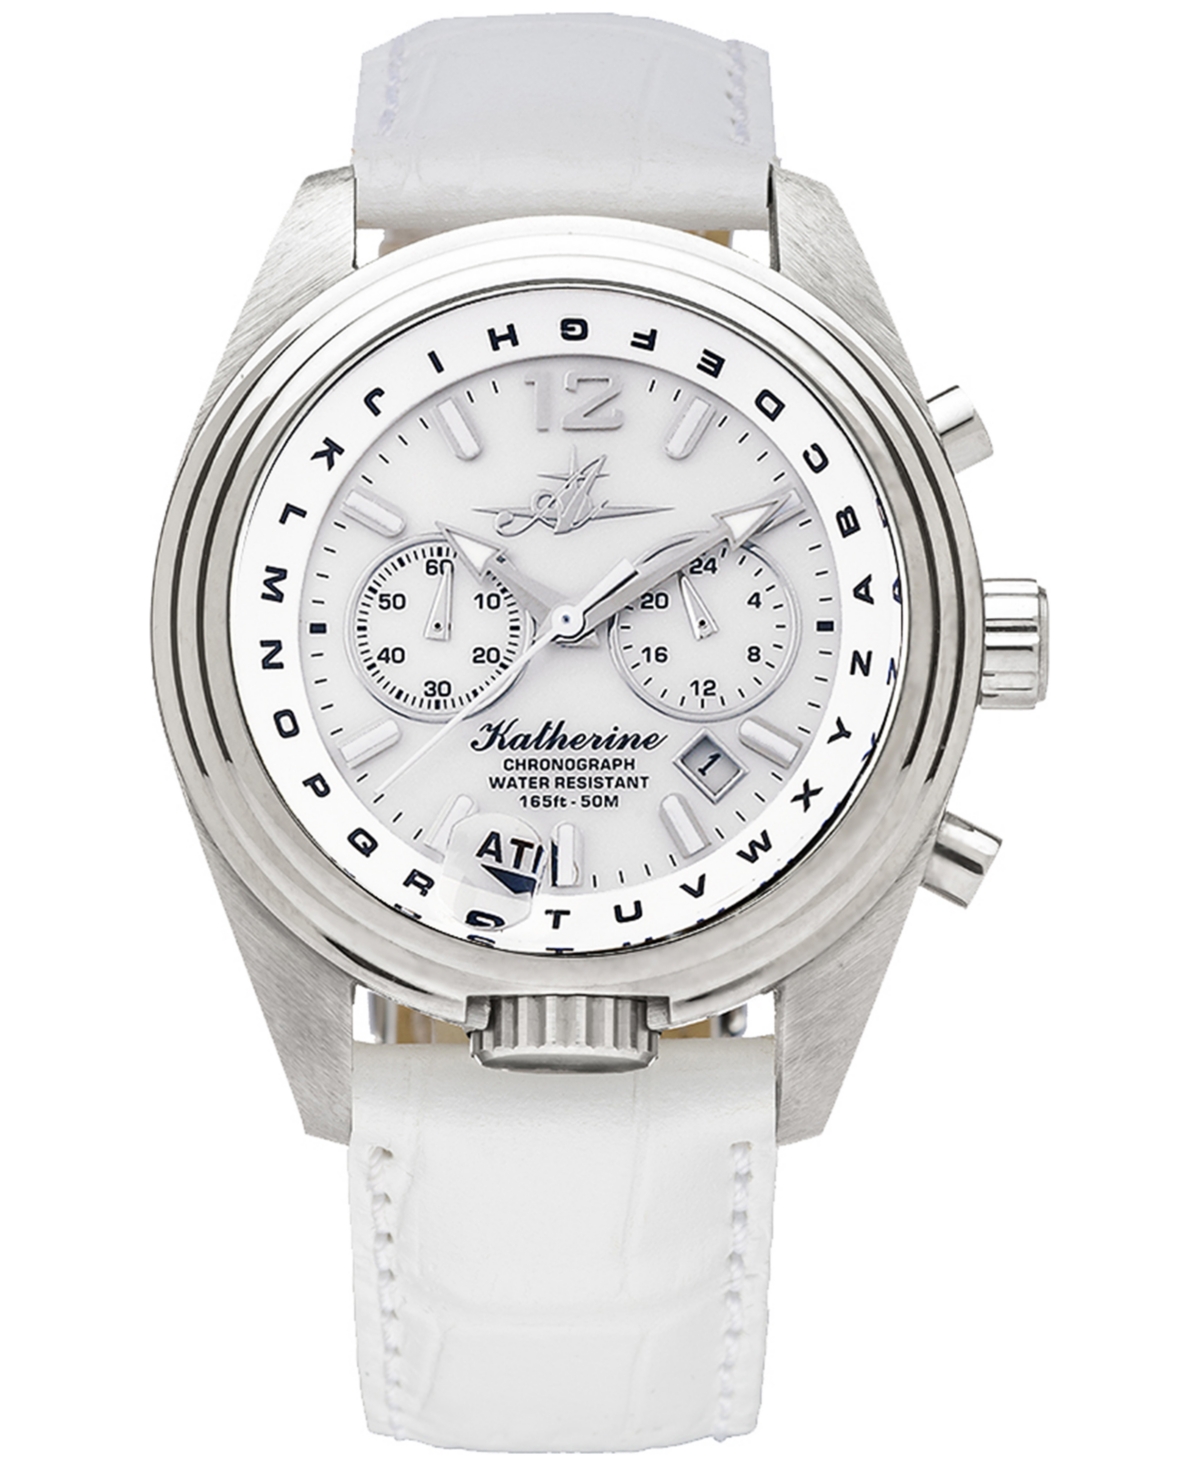 Abingdon Co. Women's Katherine Chronograph White Leather Strap Steel Watch 40mm In Pearl White